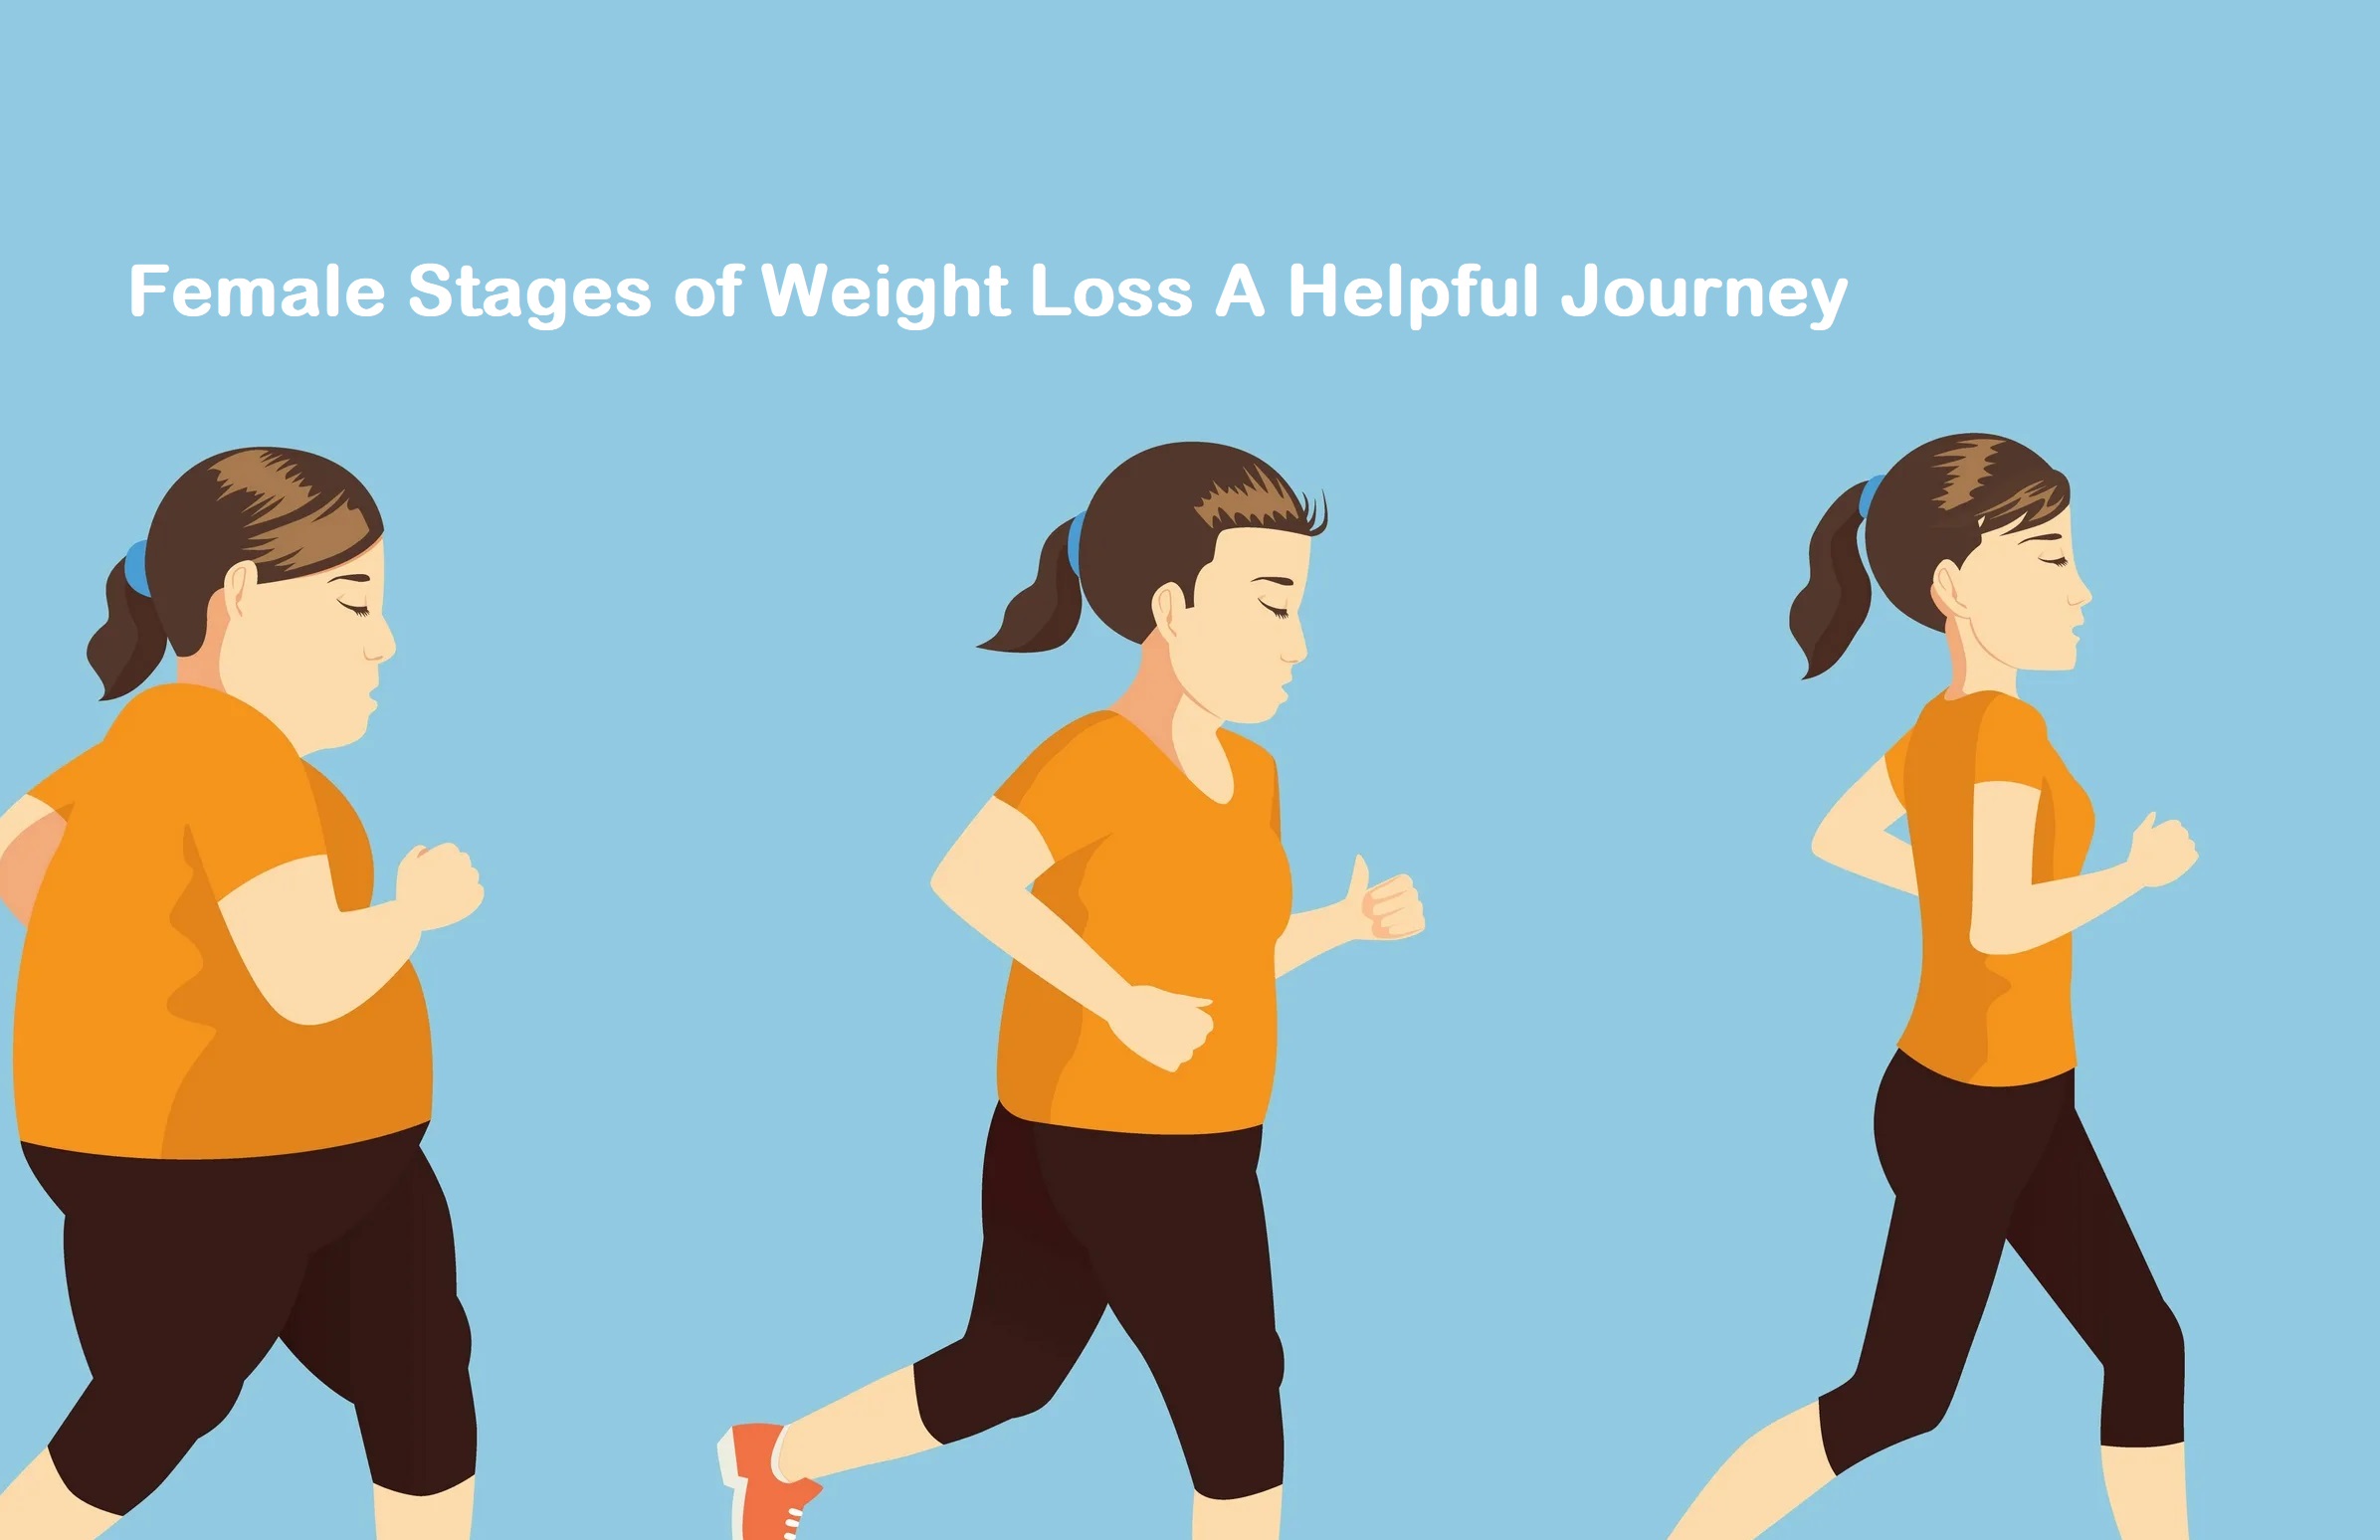 Female Stages of Weight Loss A Helpful Journey